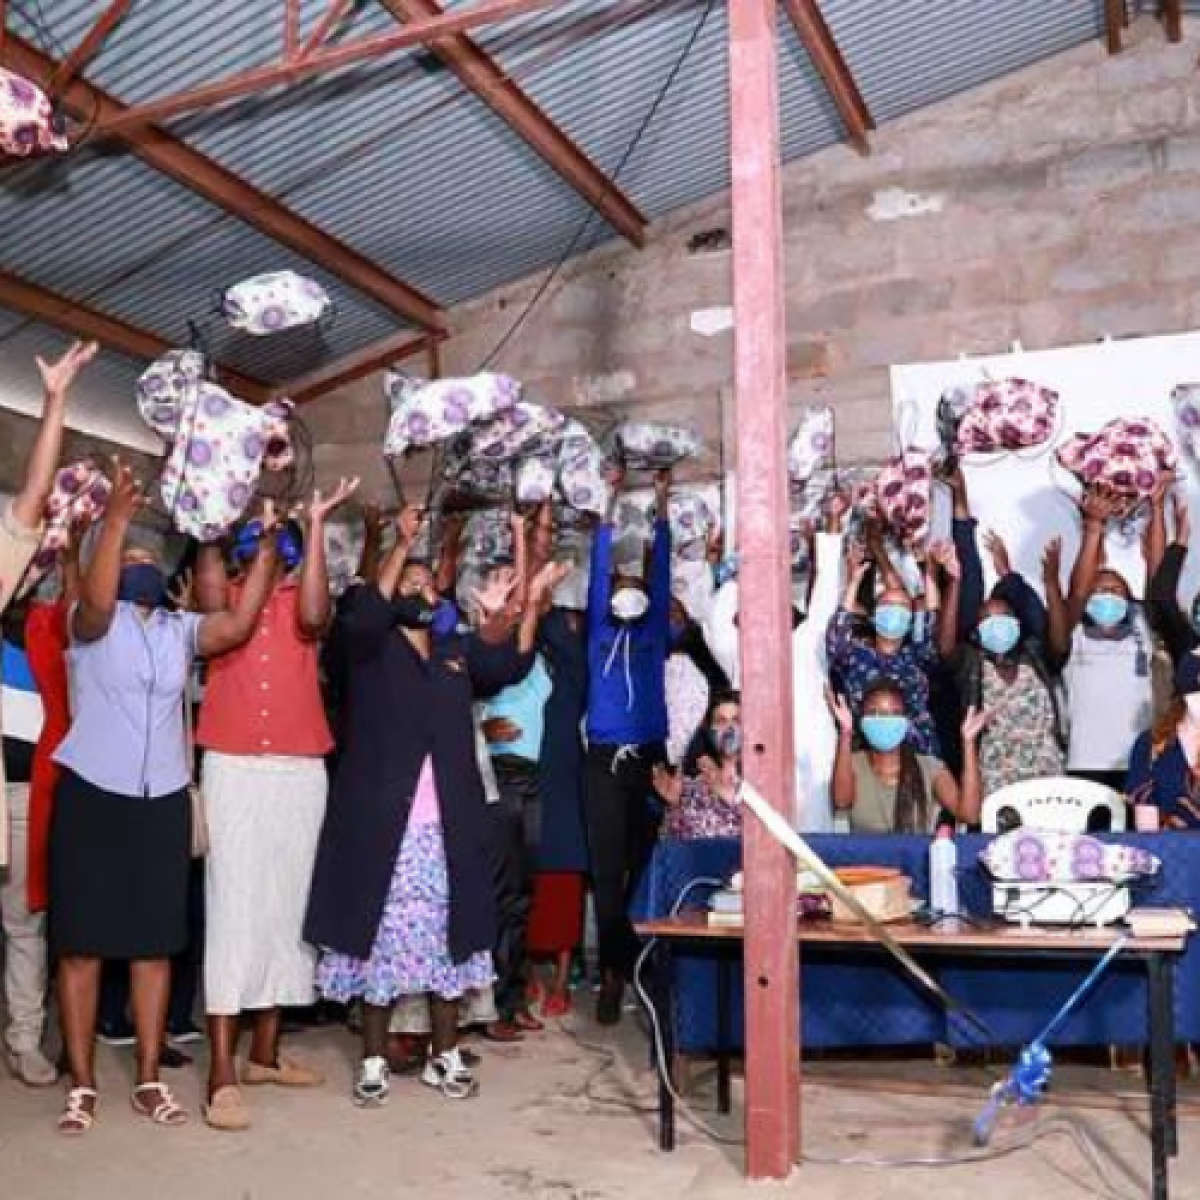 Women employees in Kenya with their locally manufactured bag that includes locally sourced, disposable and reusable menstrual products and underwear.